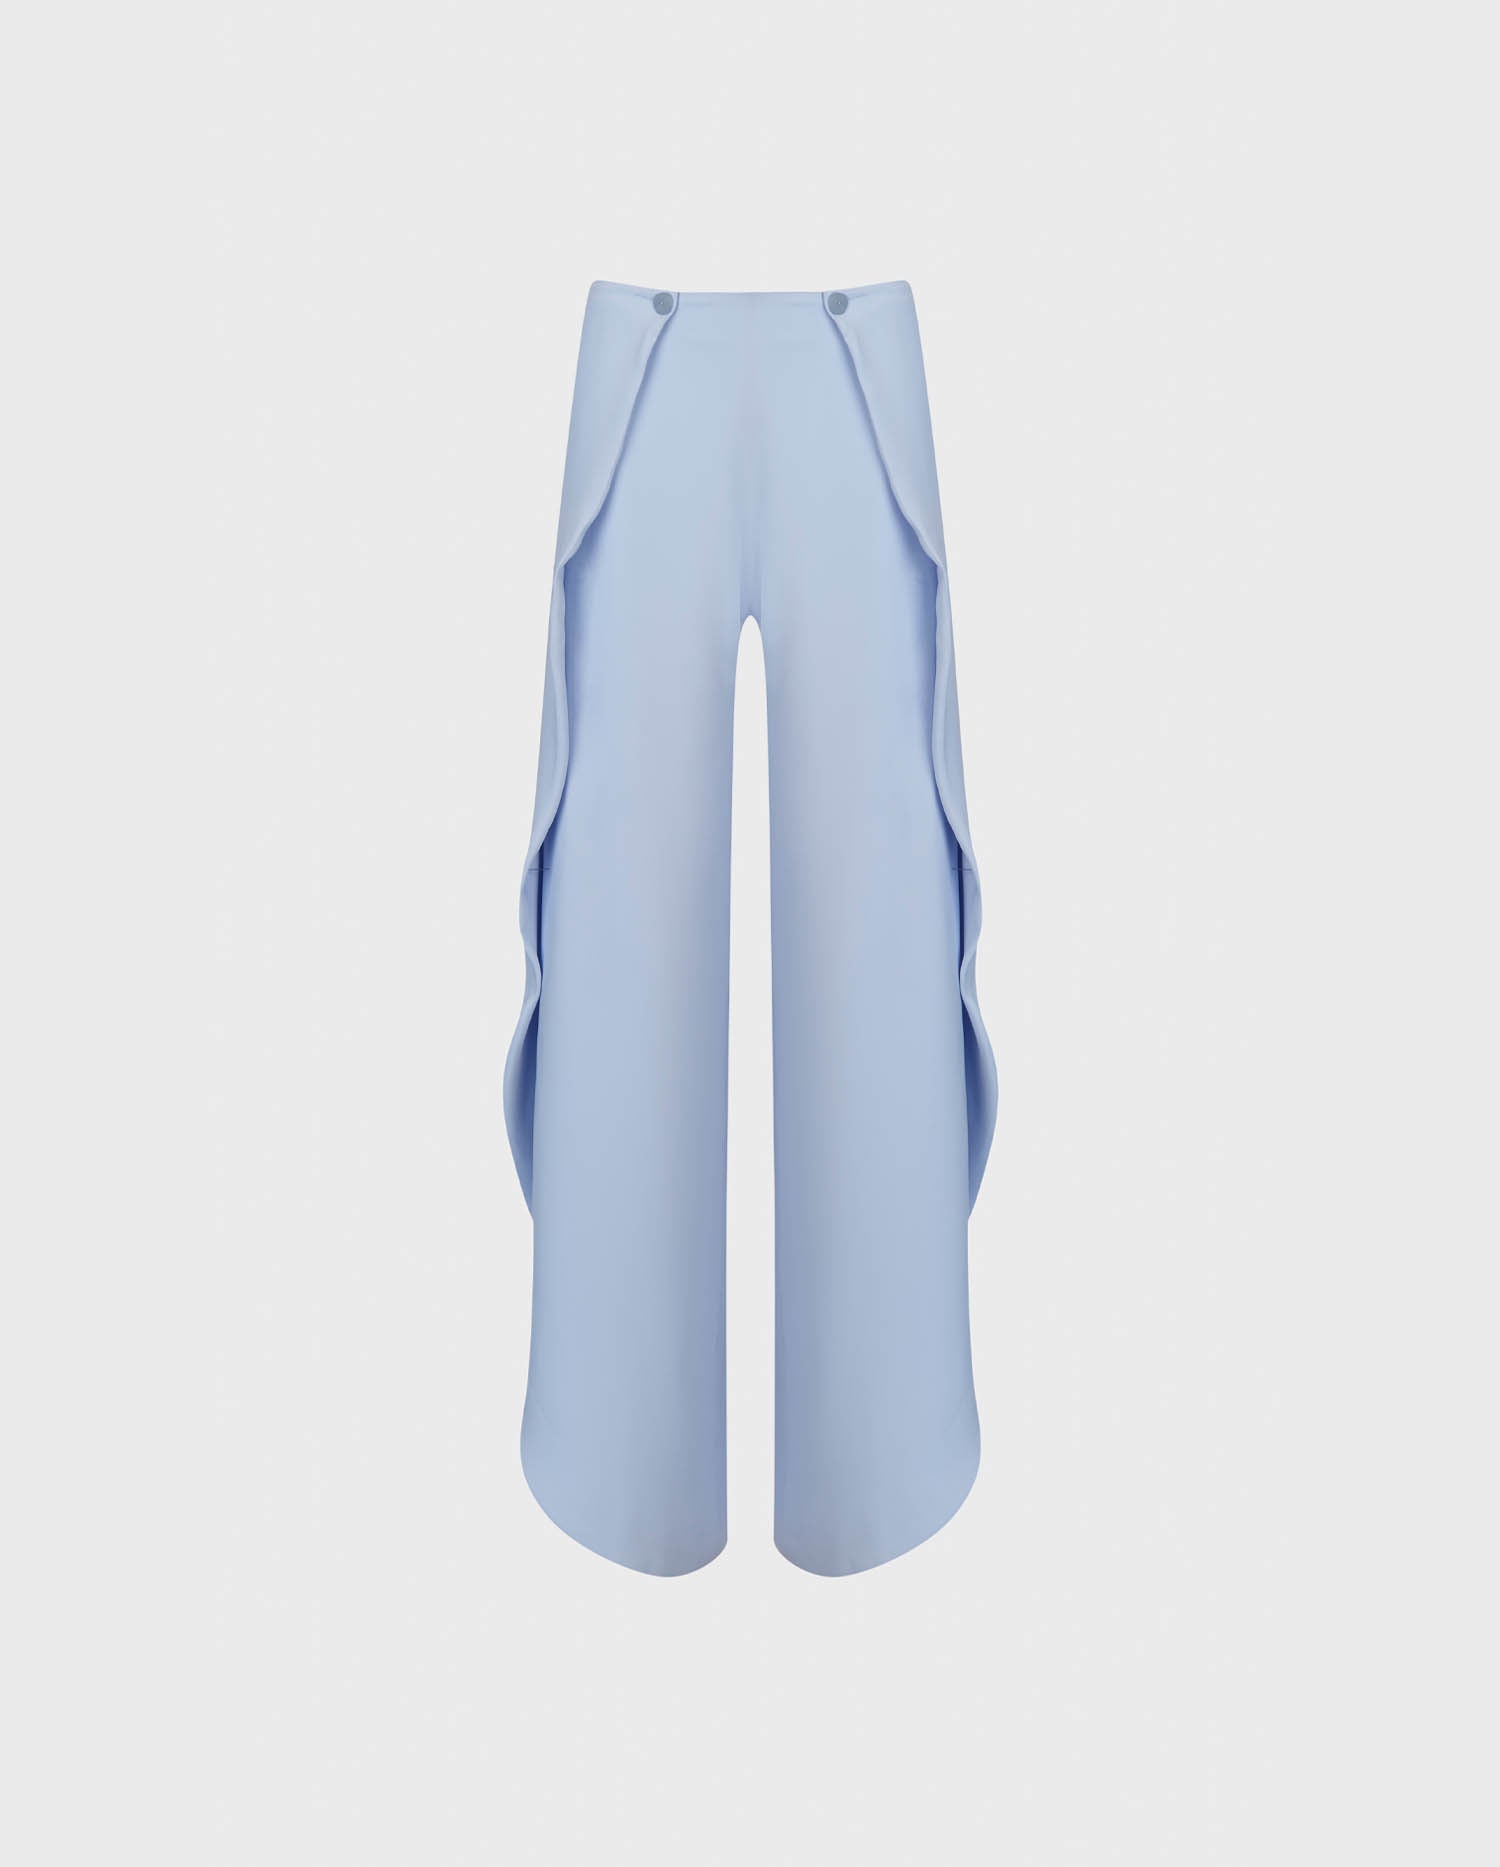 Discover The MELDREY Open Tulip Leg Trousers from ANNE FONTAINE